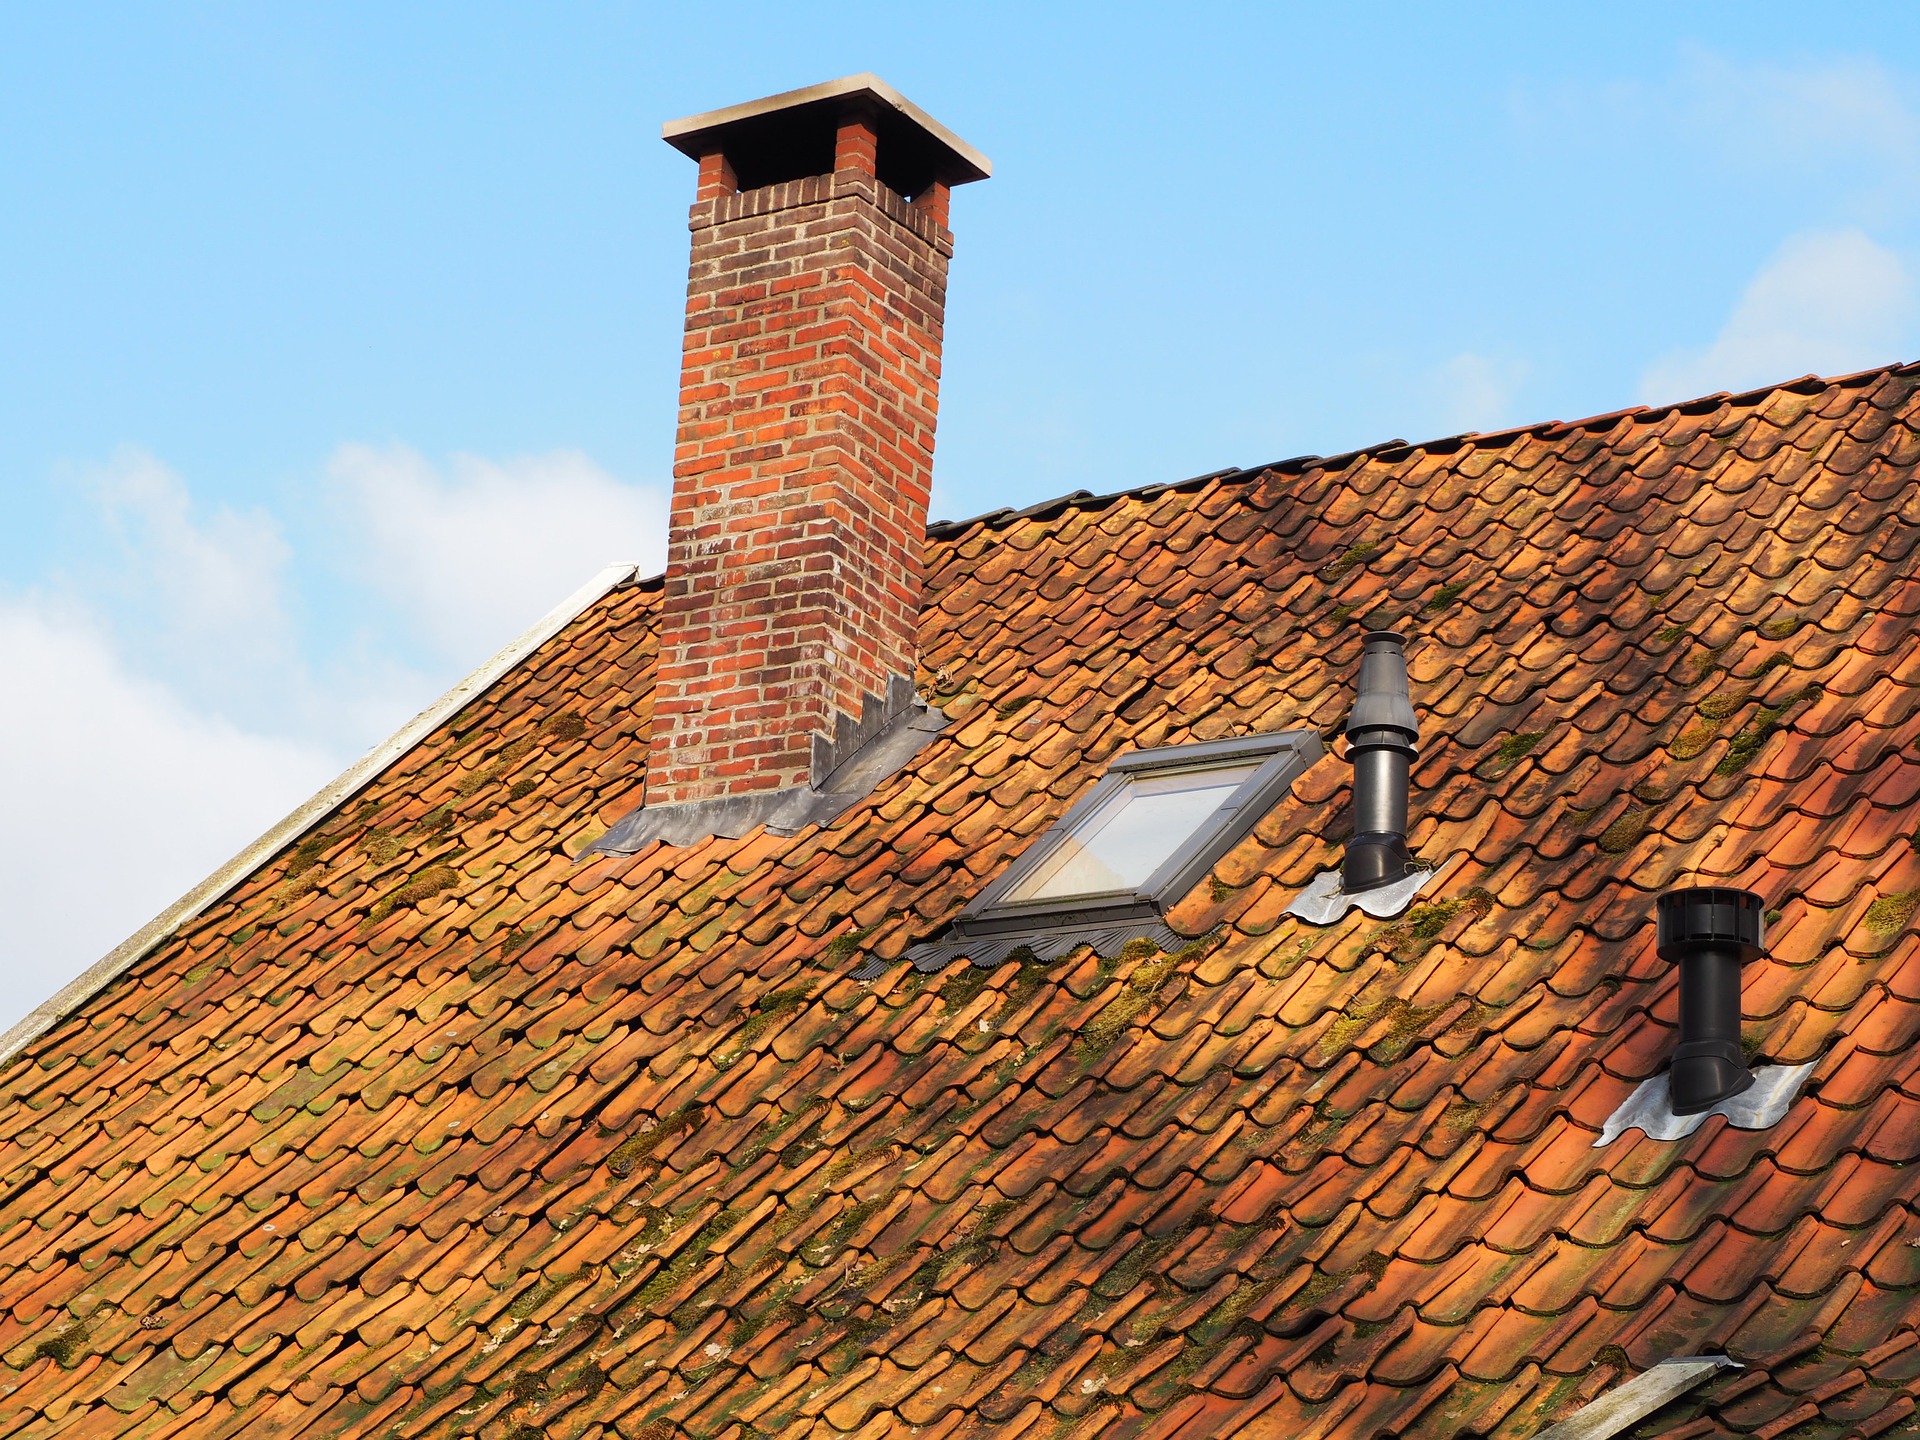 All you need to know about chimney sweeping - OurProperty.co.uk